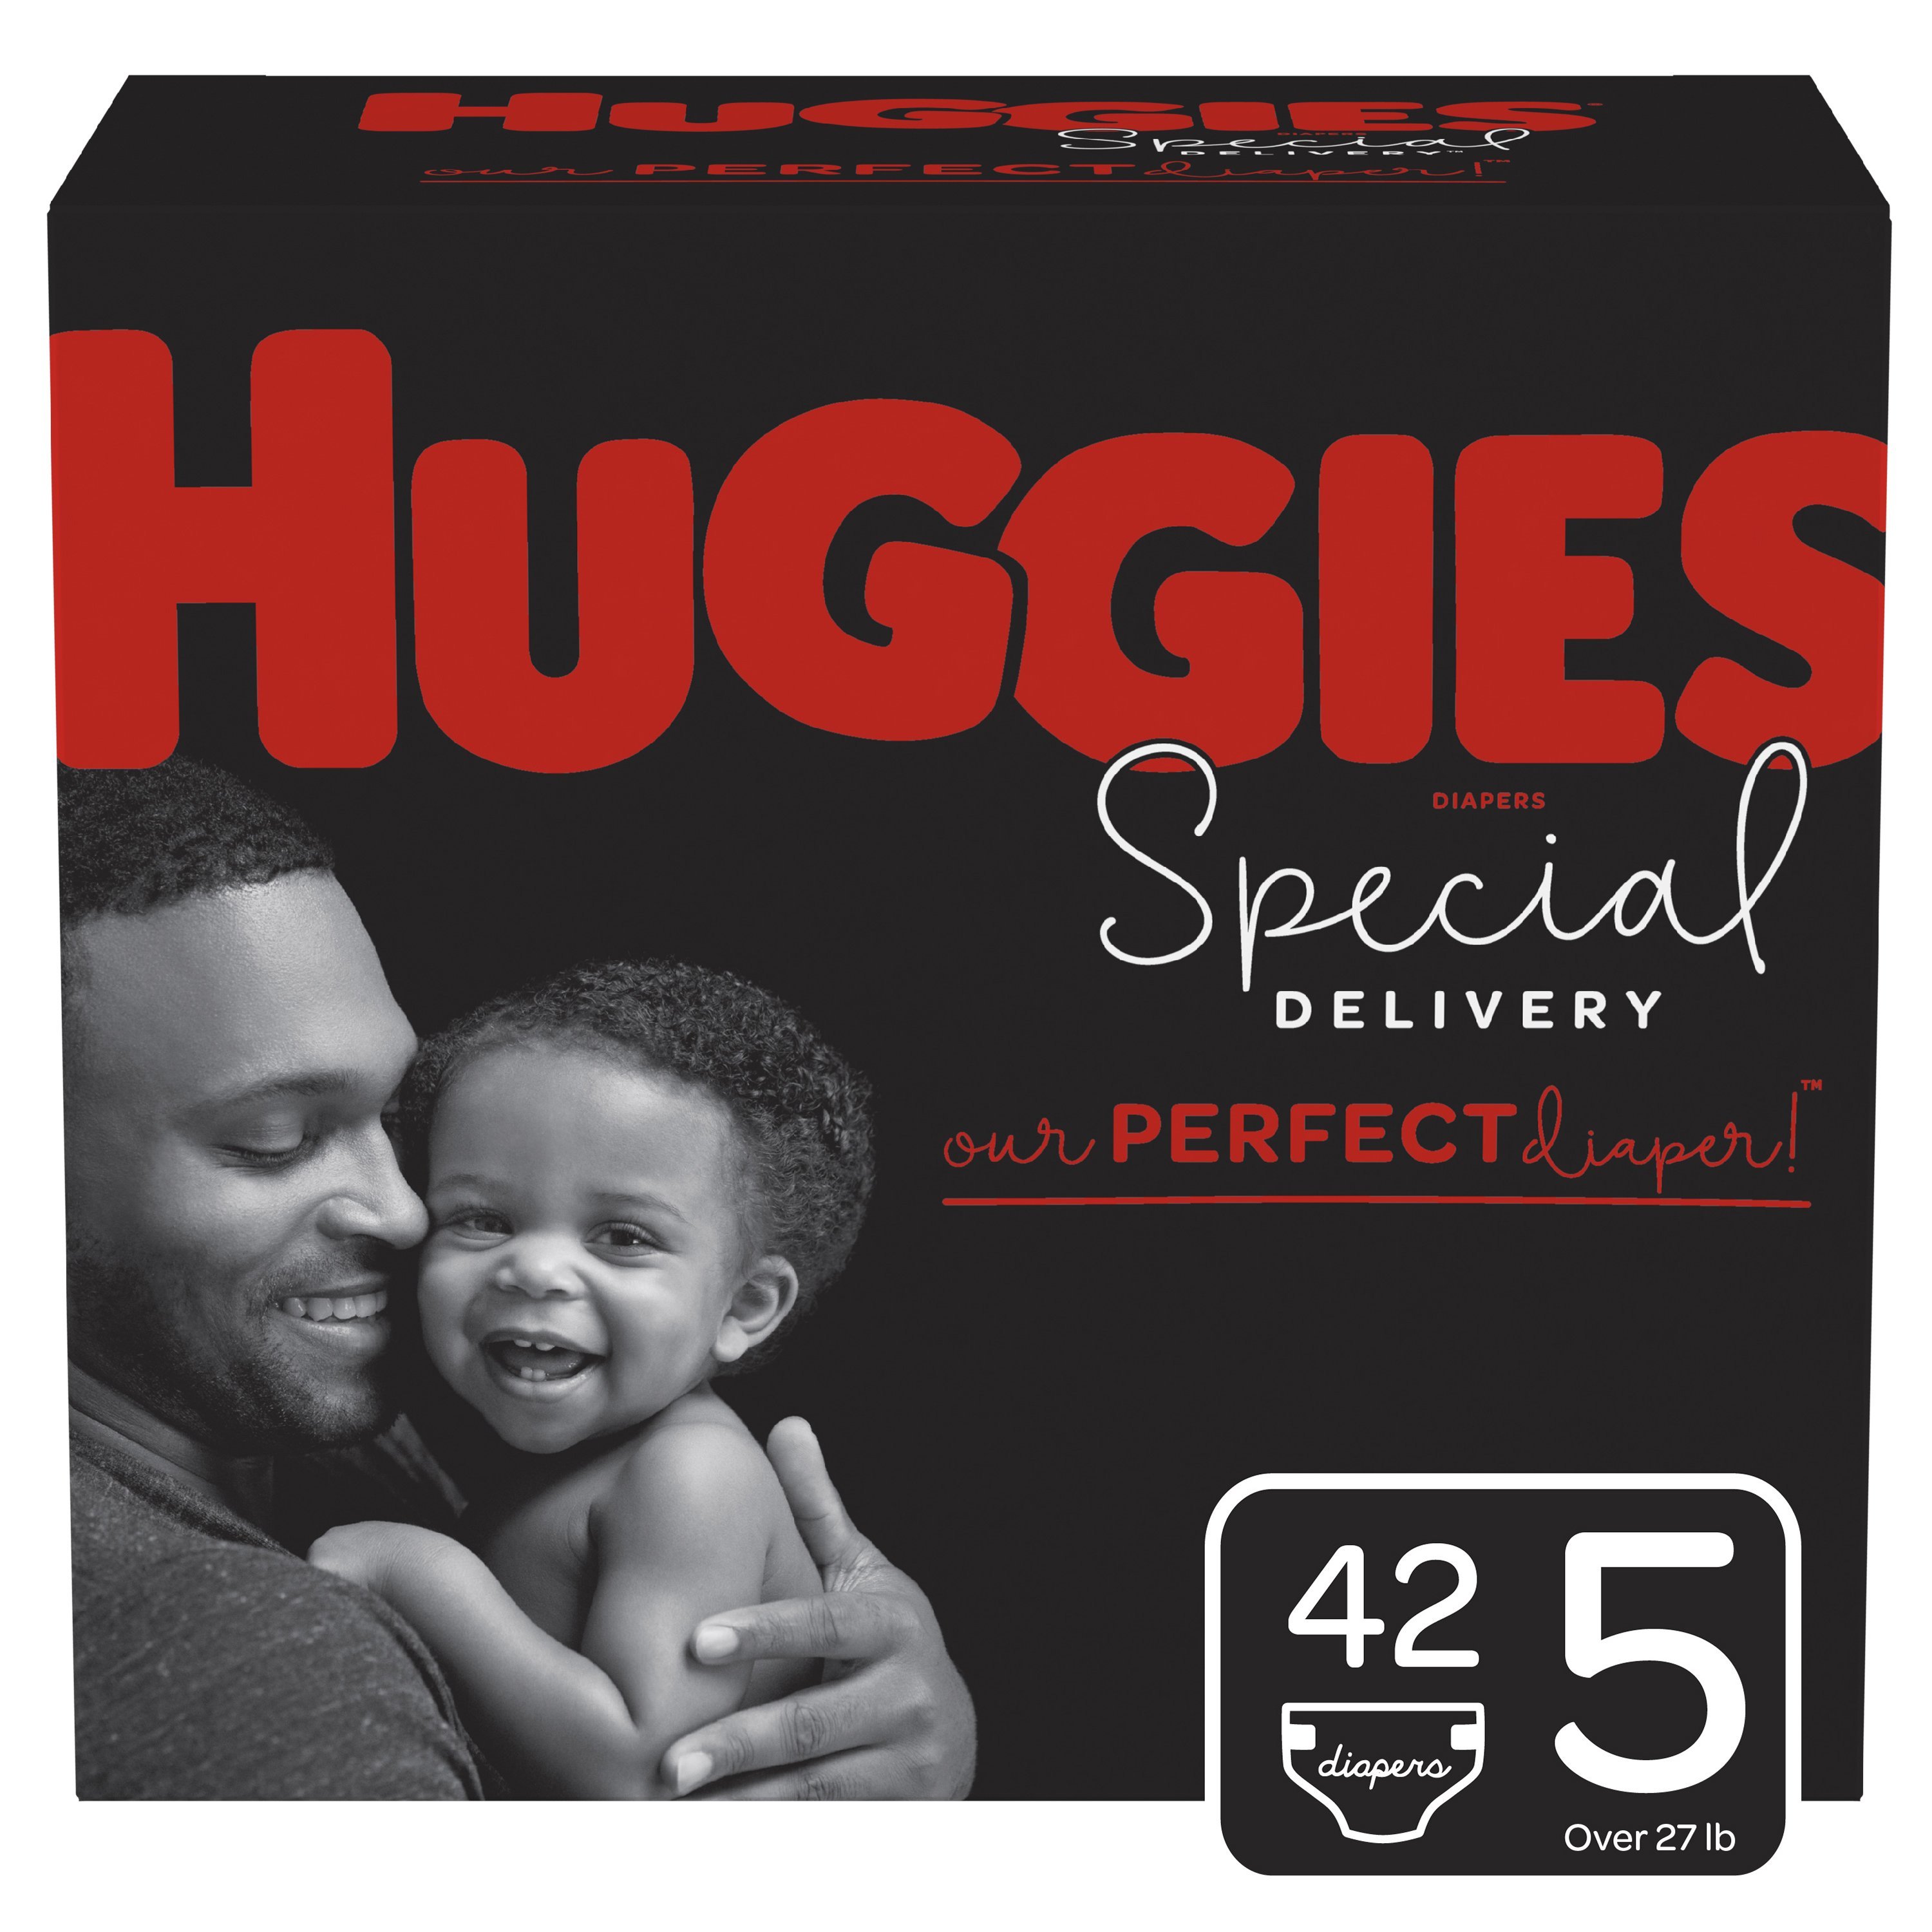 Huggies Special Delivery Hypoallergenic Baby Diapers, Size 5, 42 Ct, Giga Jr. Pack - image 1 of 9